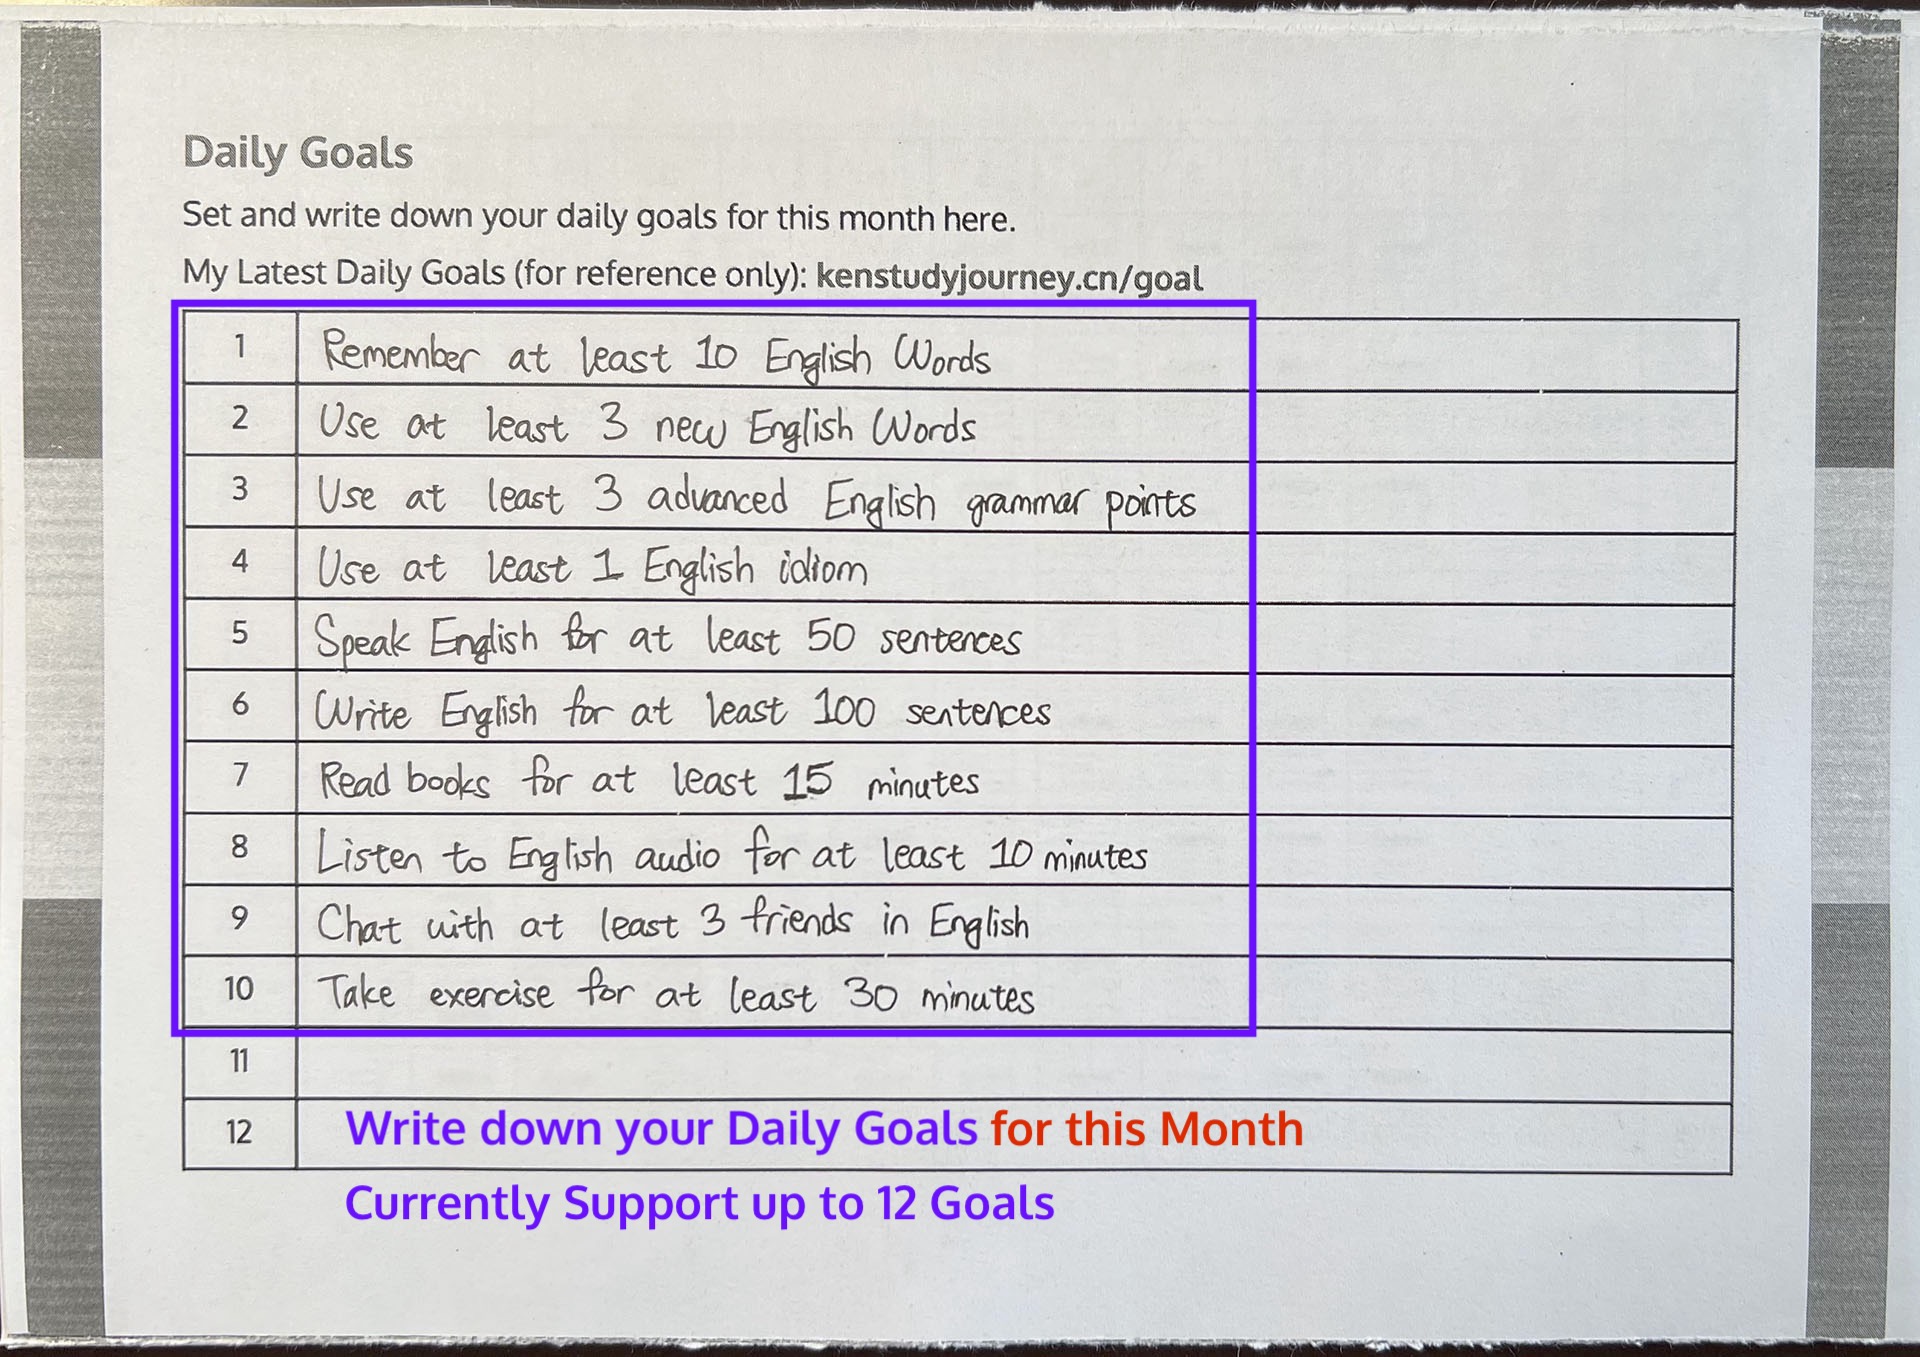 Write down Daily Goals on the Checklist